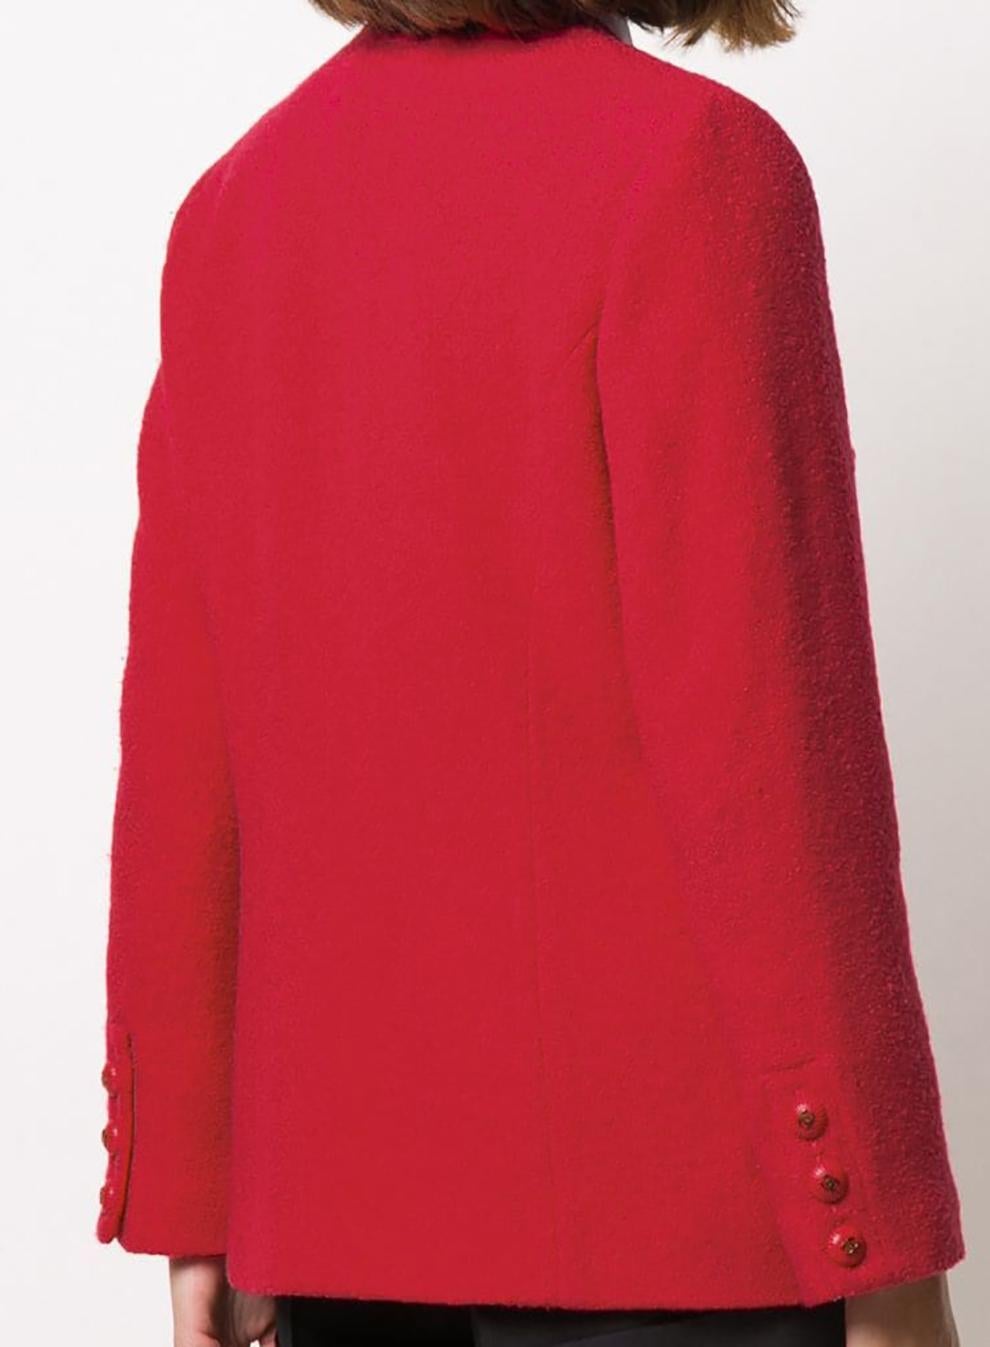 Chanel Red Strawberry Boucle Tweed Jacket 2